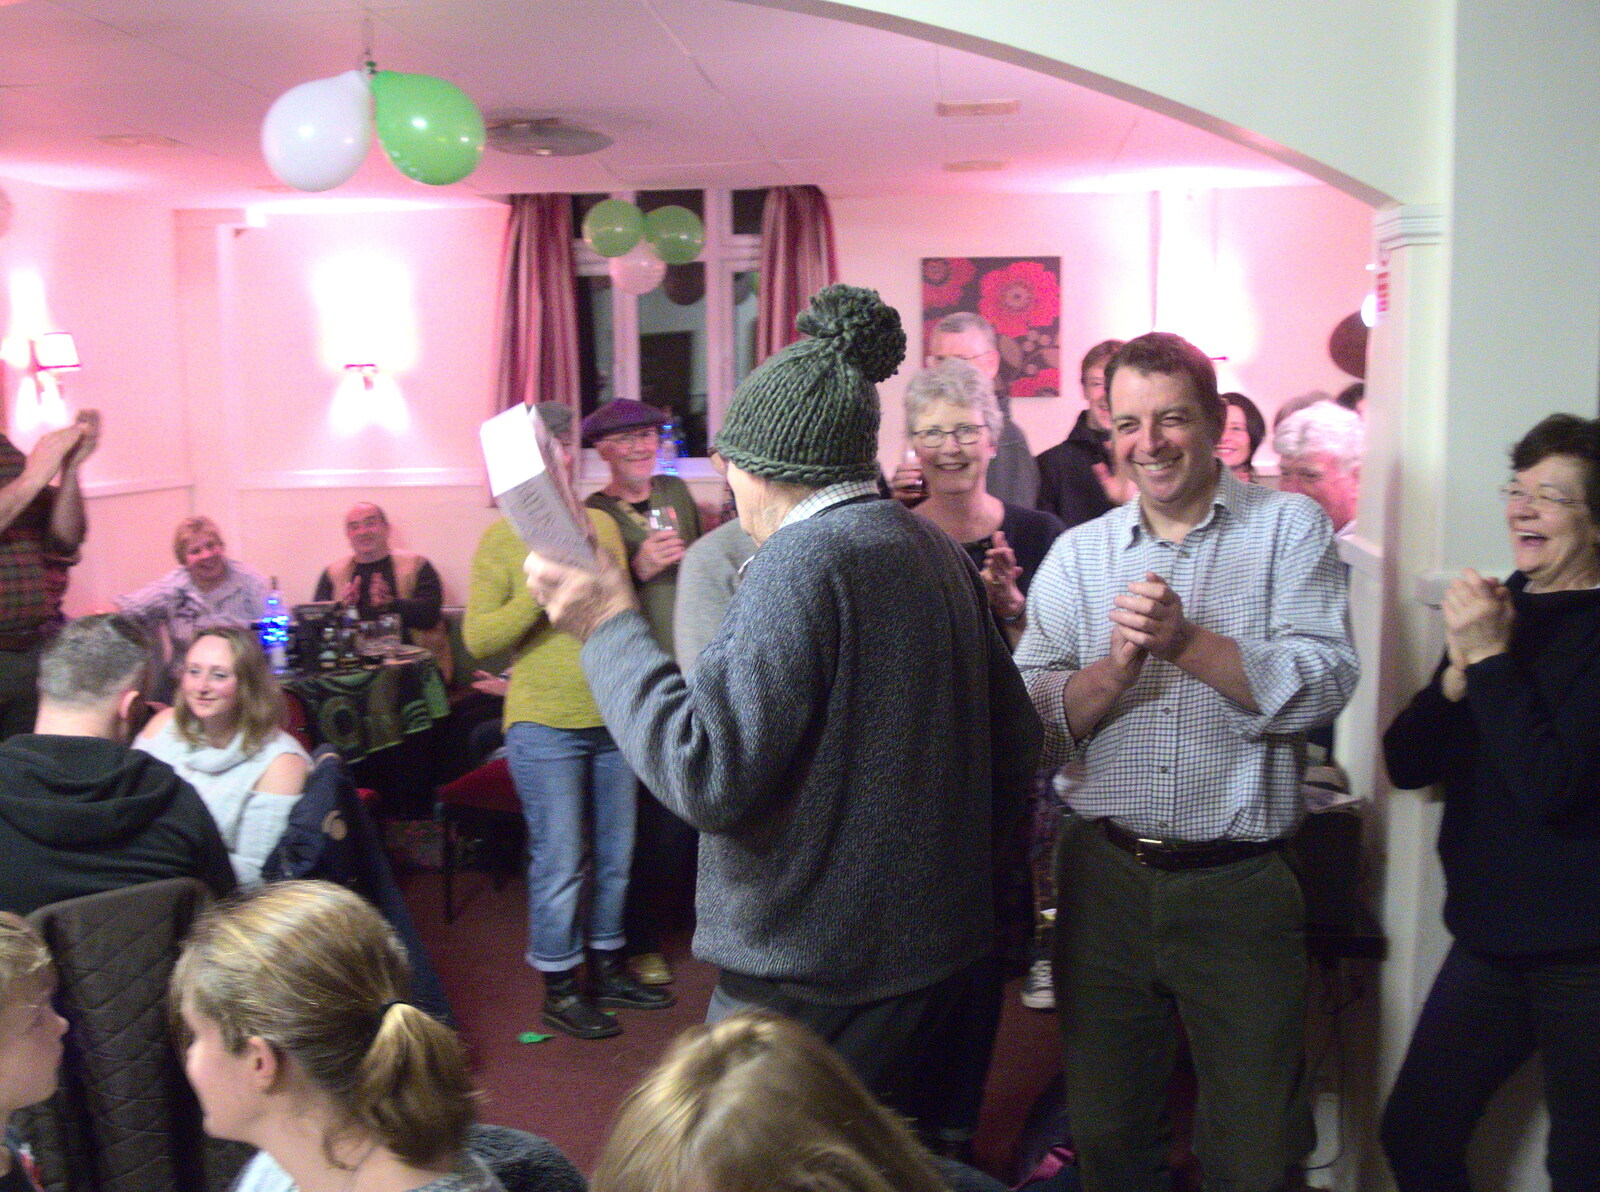 Peter wins a prize again from St. Patrick's Day at the Village Hall, Brome, Suffolk - 16th March 2018